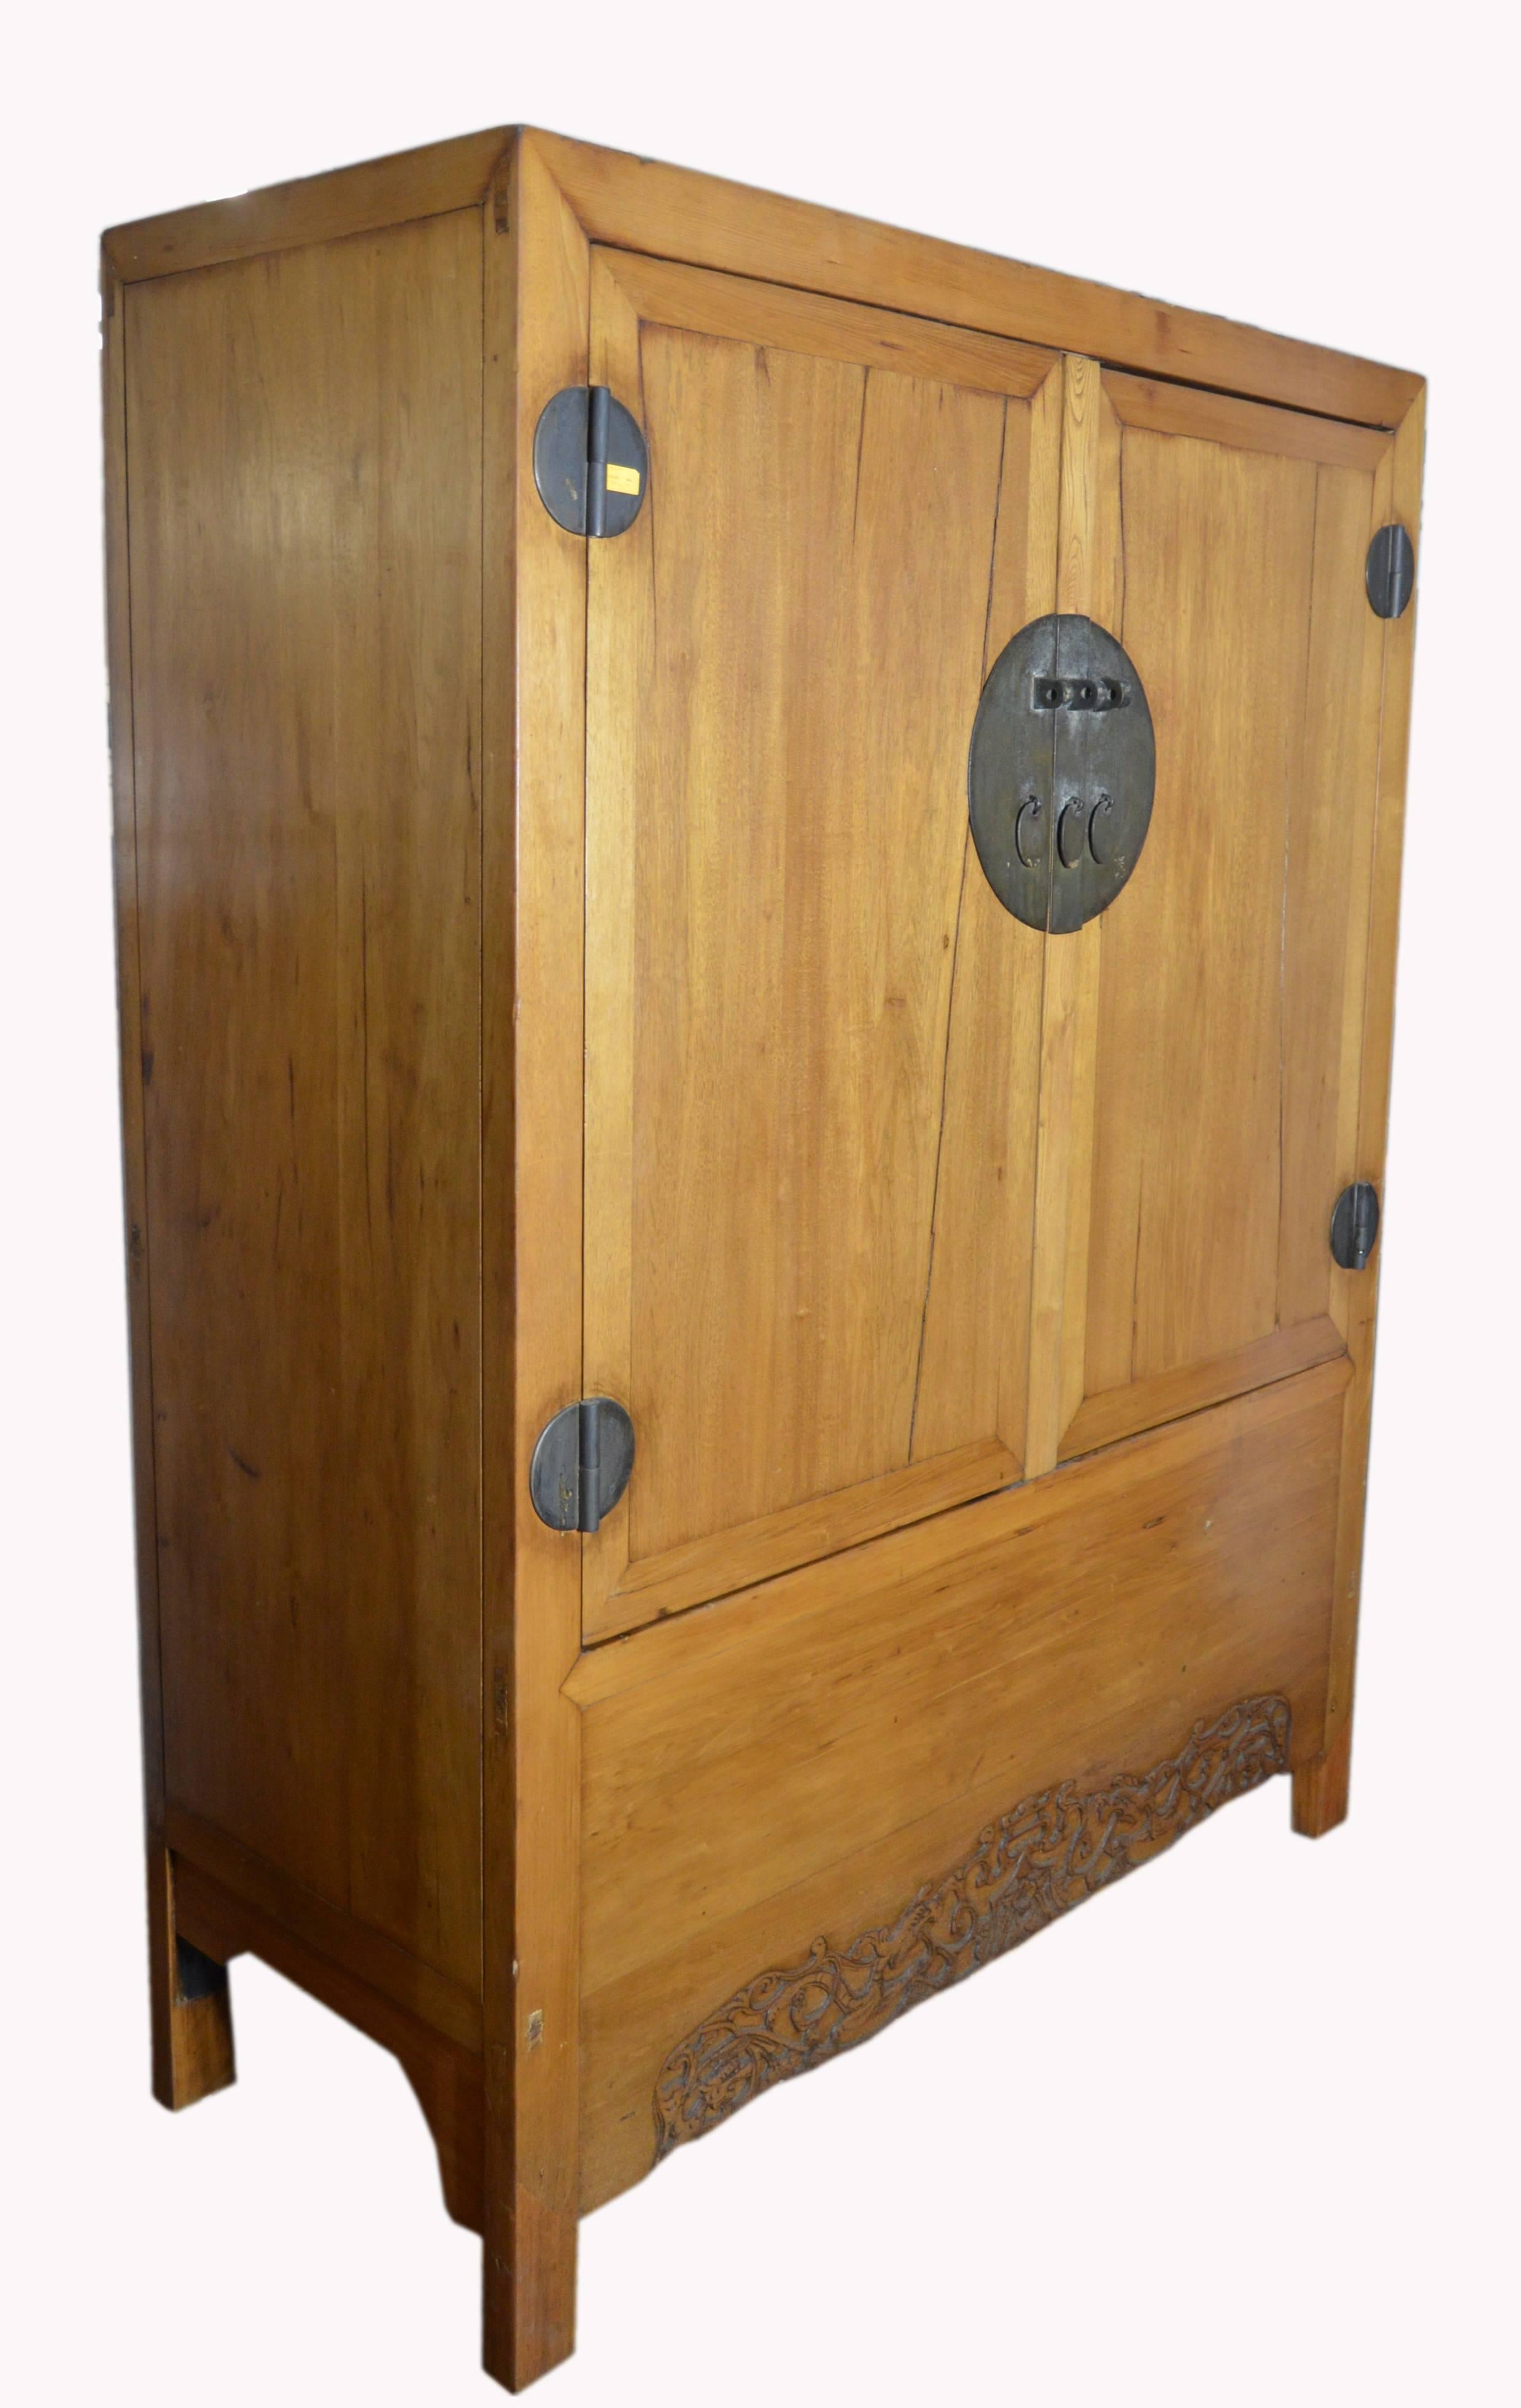 19th Century Antique Chinese Lacquered Cabinet with Doors, Drawers and Brass Hardware For Sale